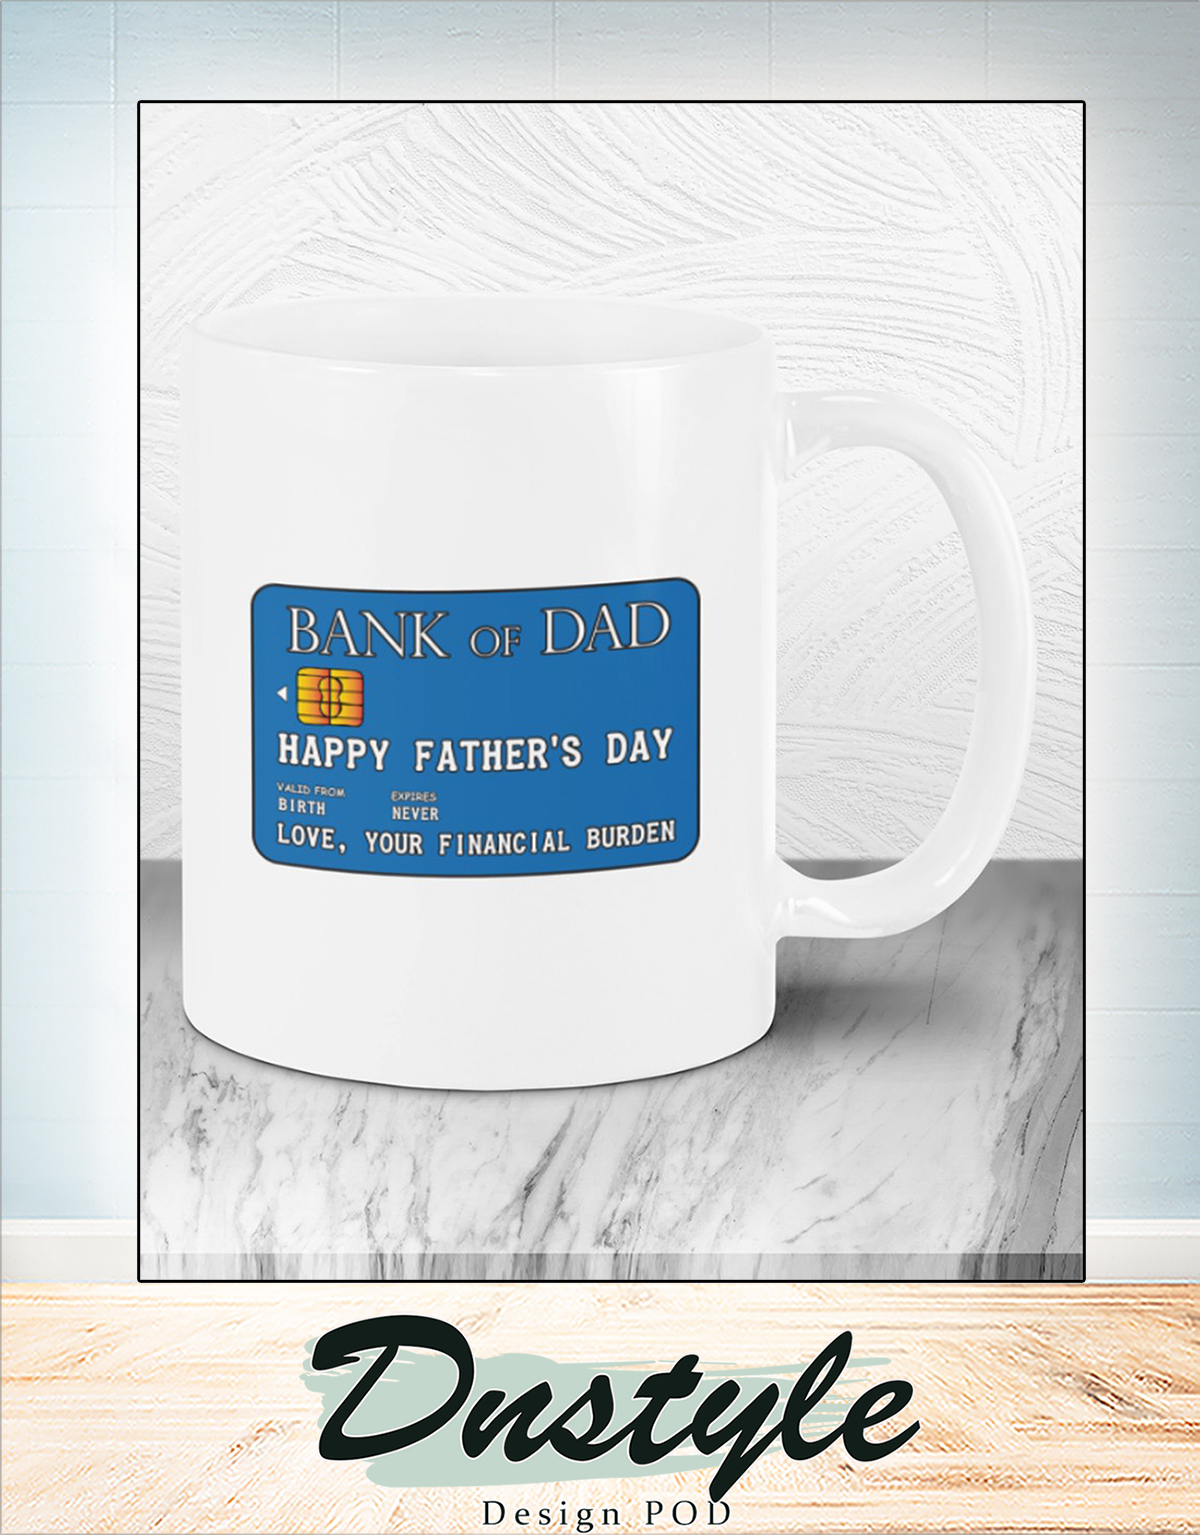 Bank of dad happy father's day mug 1